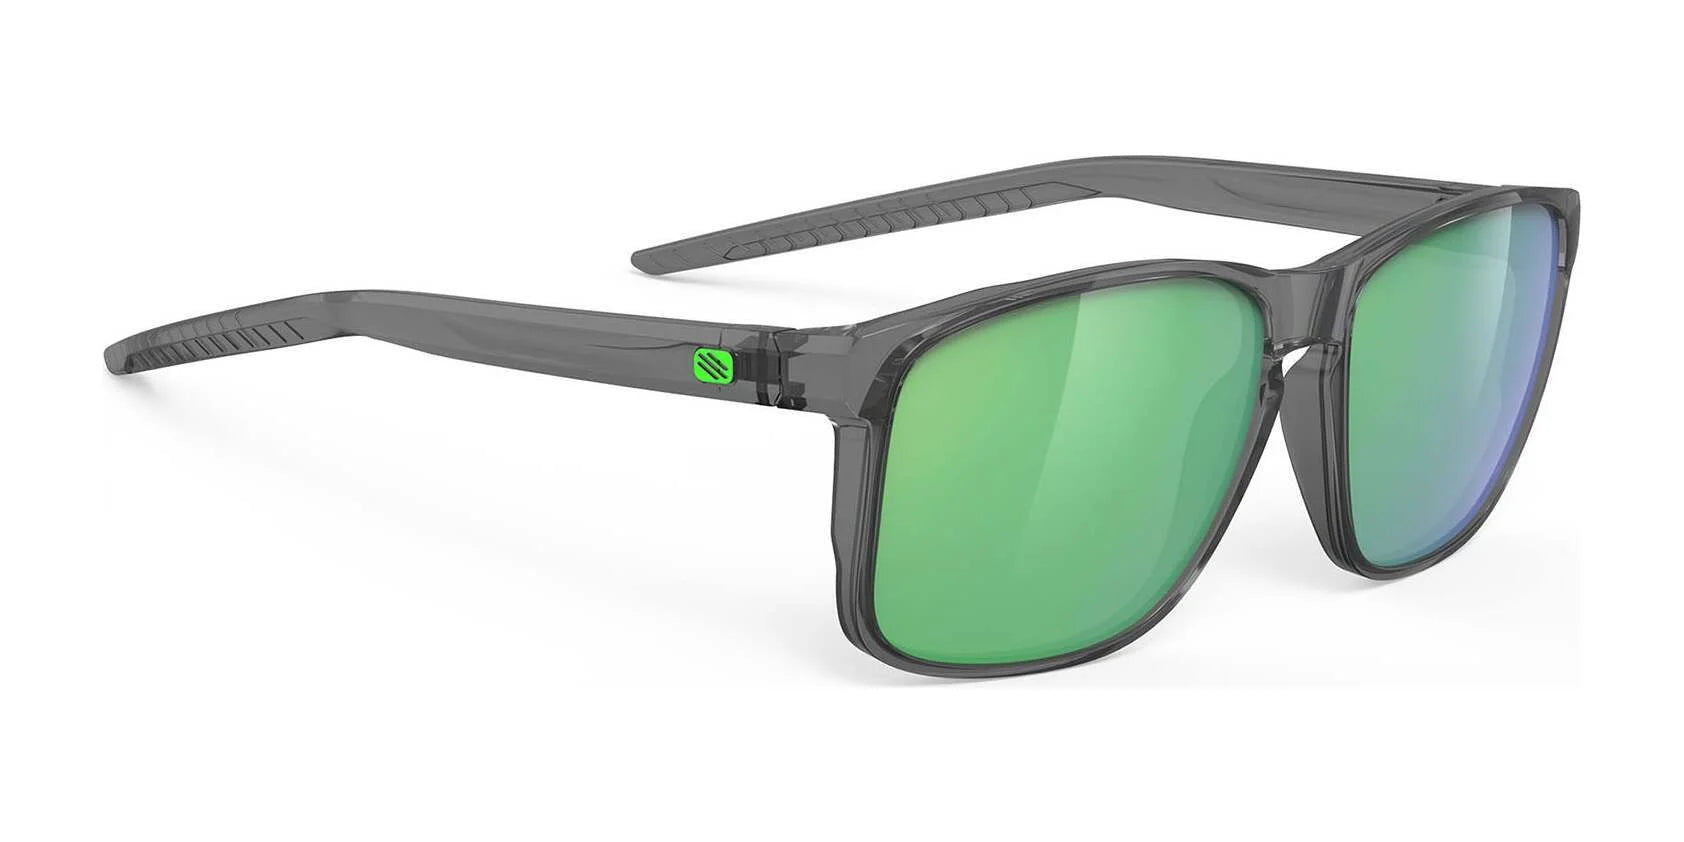 Rudy Project Overlap Sunglasses Polar 3FX HDR Multilaser Green / Crystal Ash